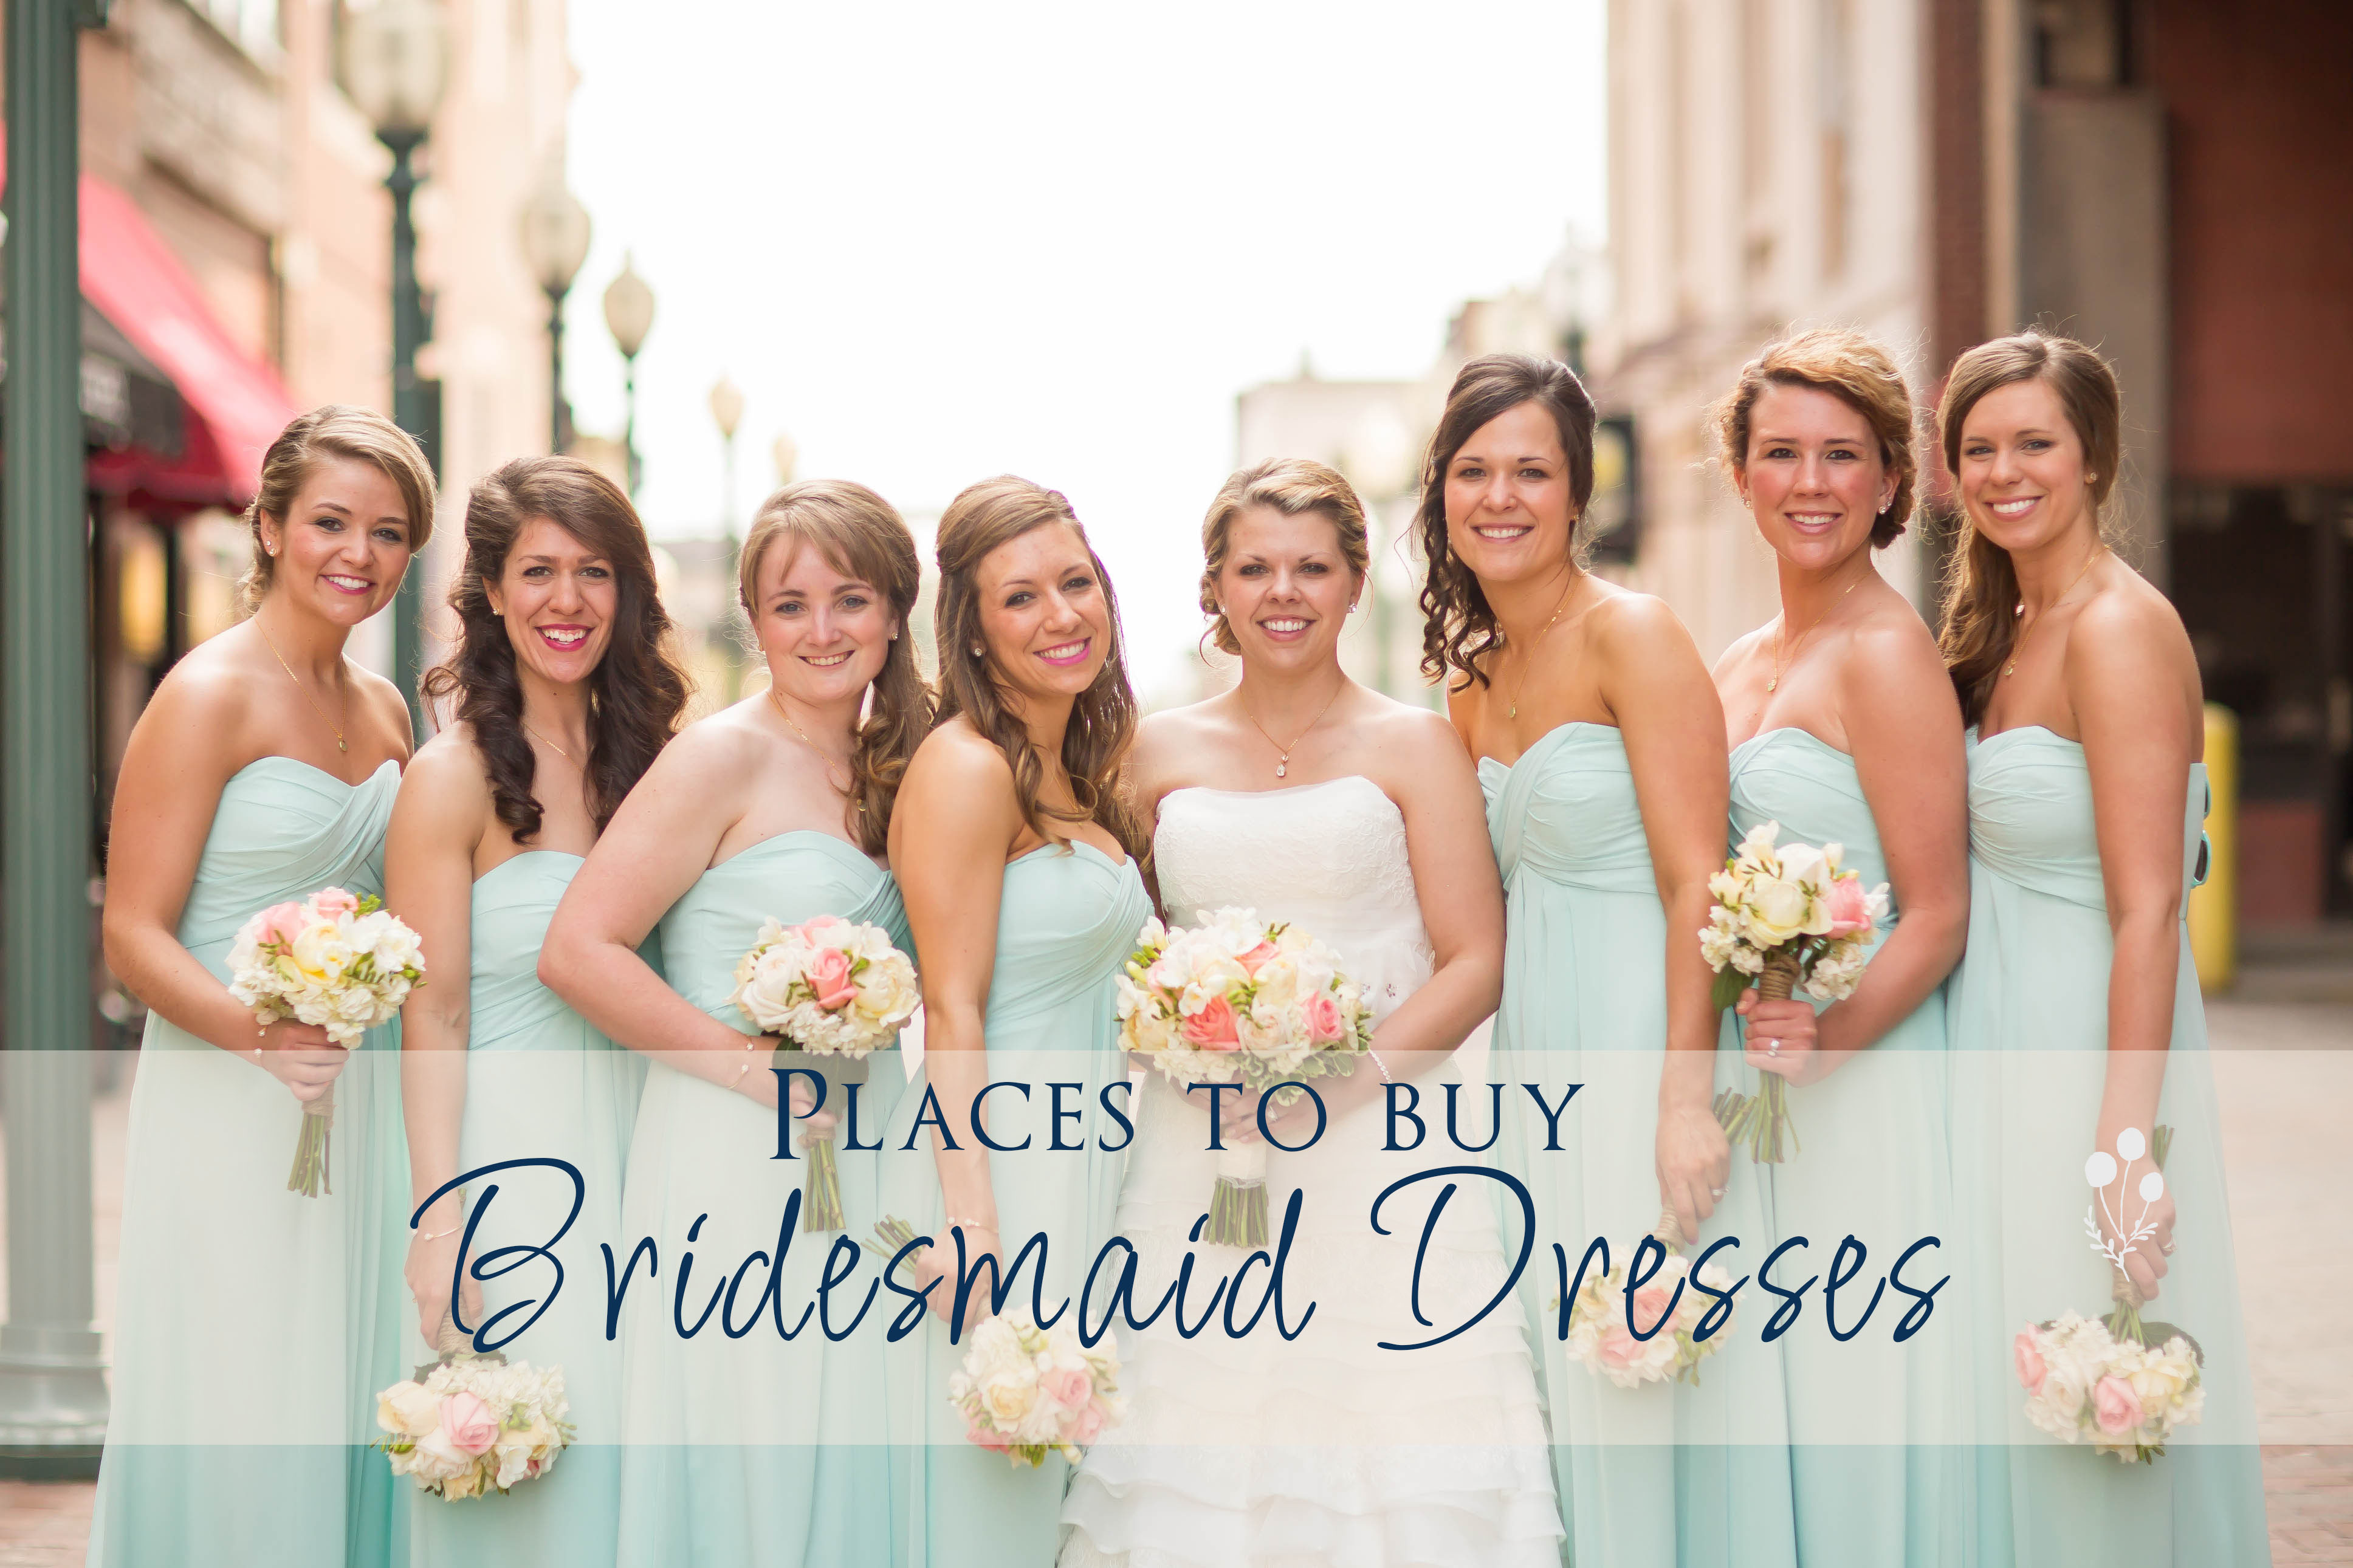  Places  to Buy  Bridesmaid  Dresses  Photographer Akron 